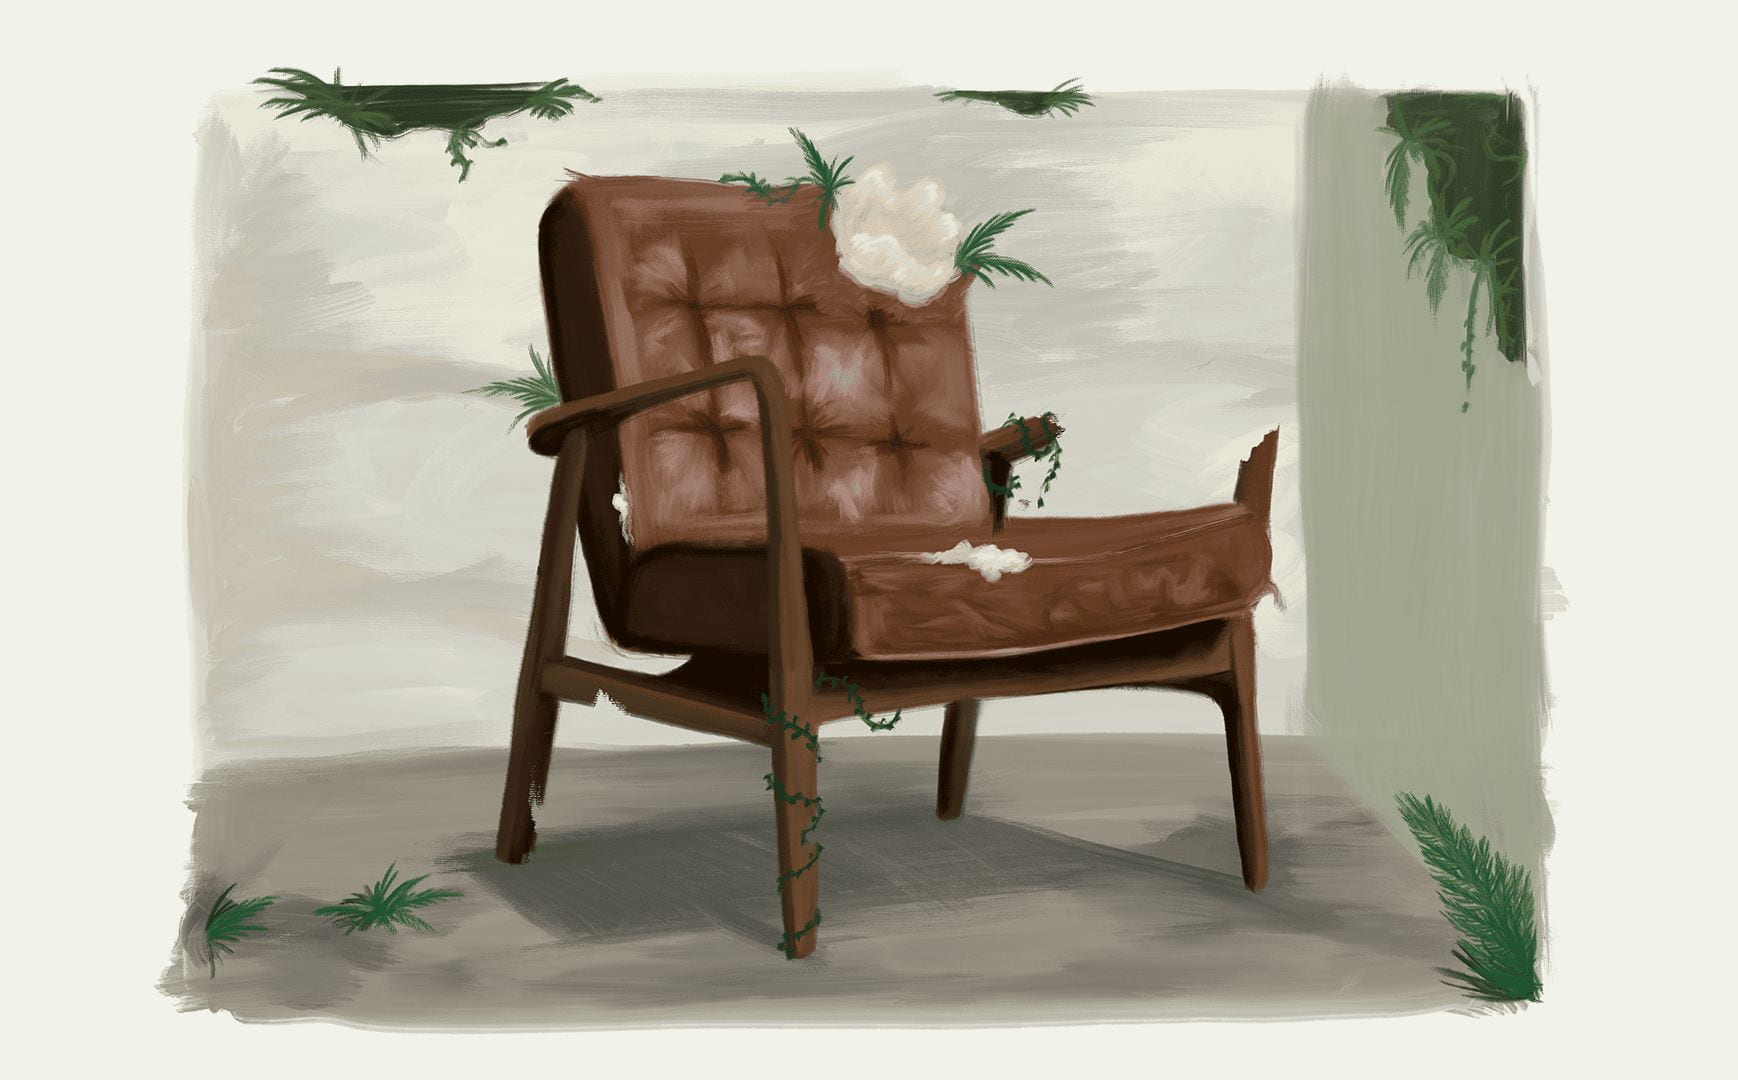 An illustration of a leather armchair with an arm broken and the stuffing leaking out.